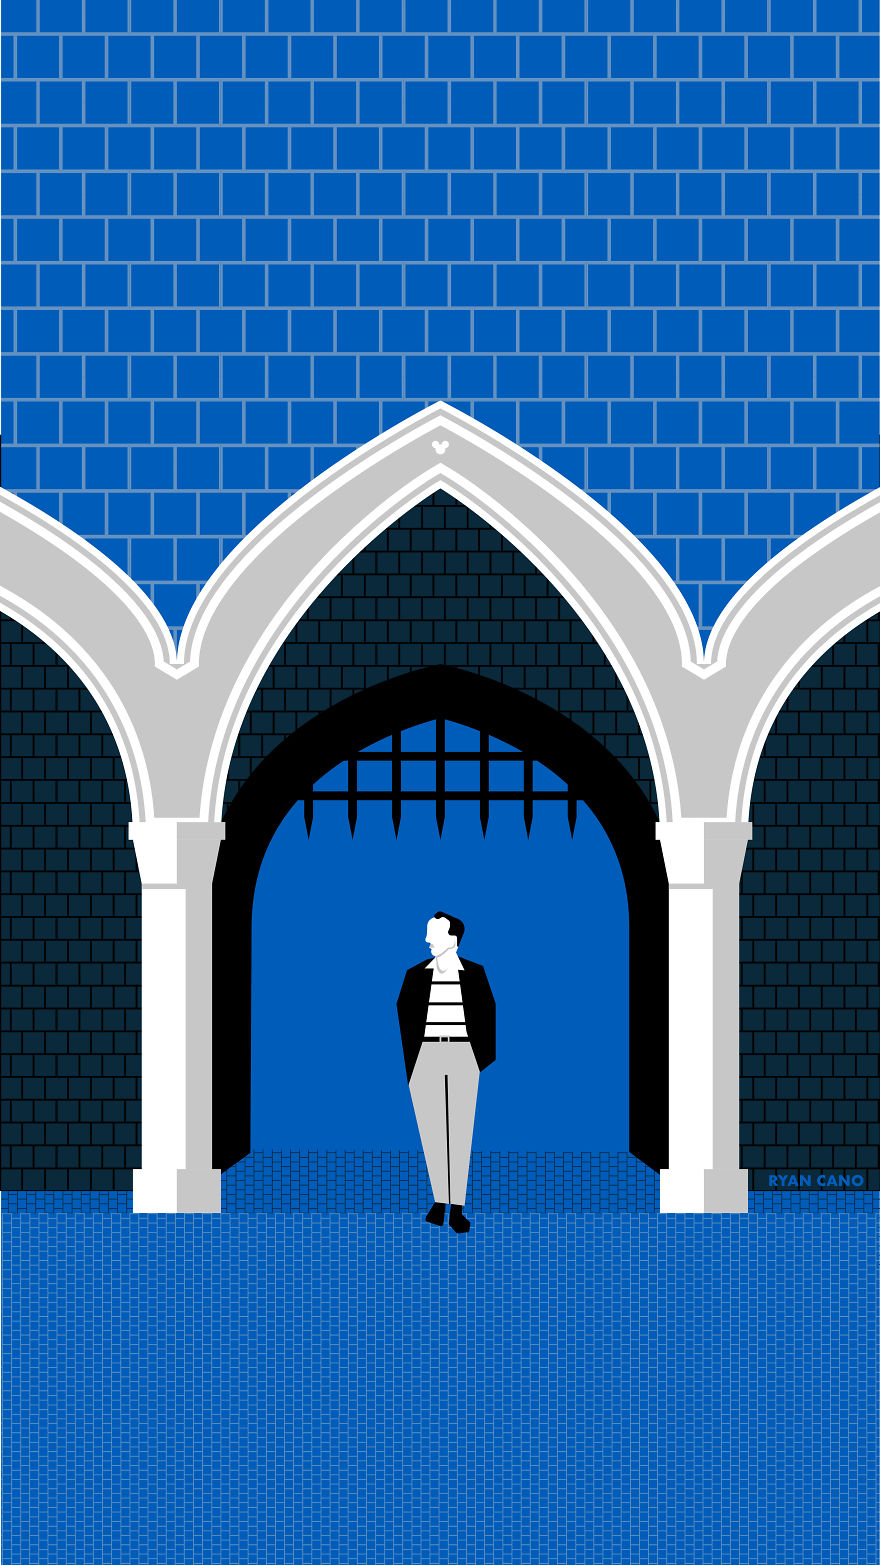 I Illustrate The Architecture And Design Of Disney Parks In Vivid Minimalism